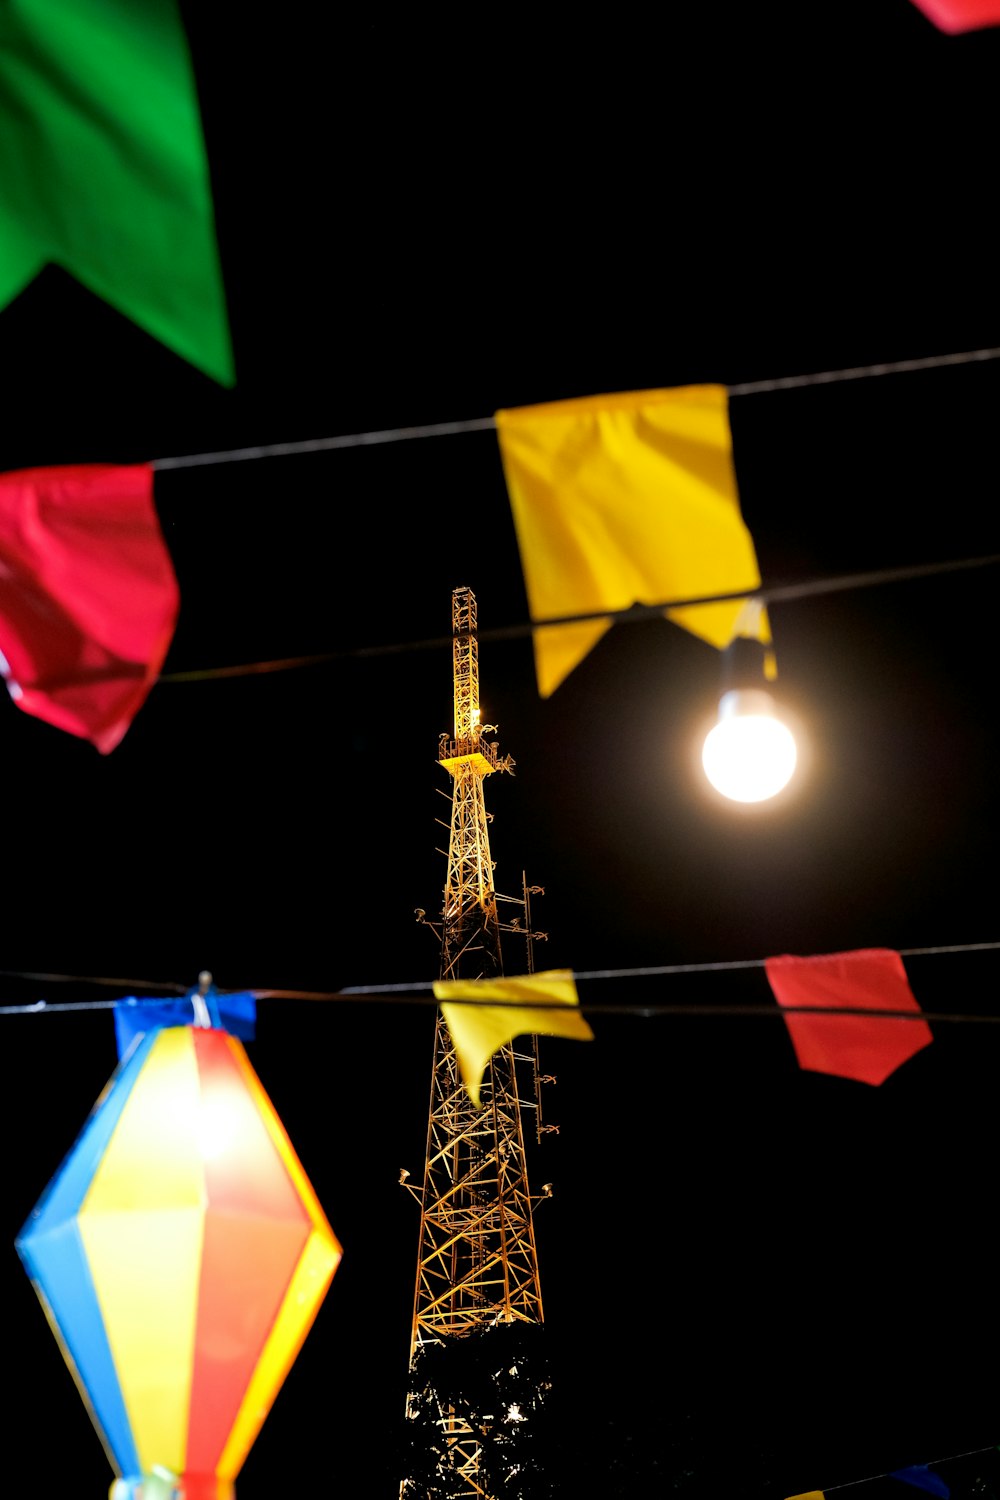 buntings and metal tower at night